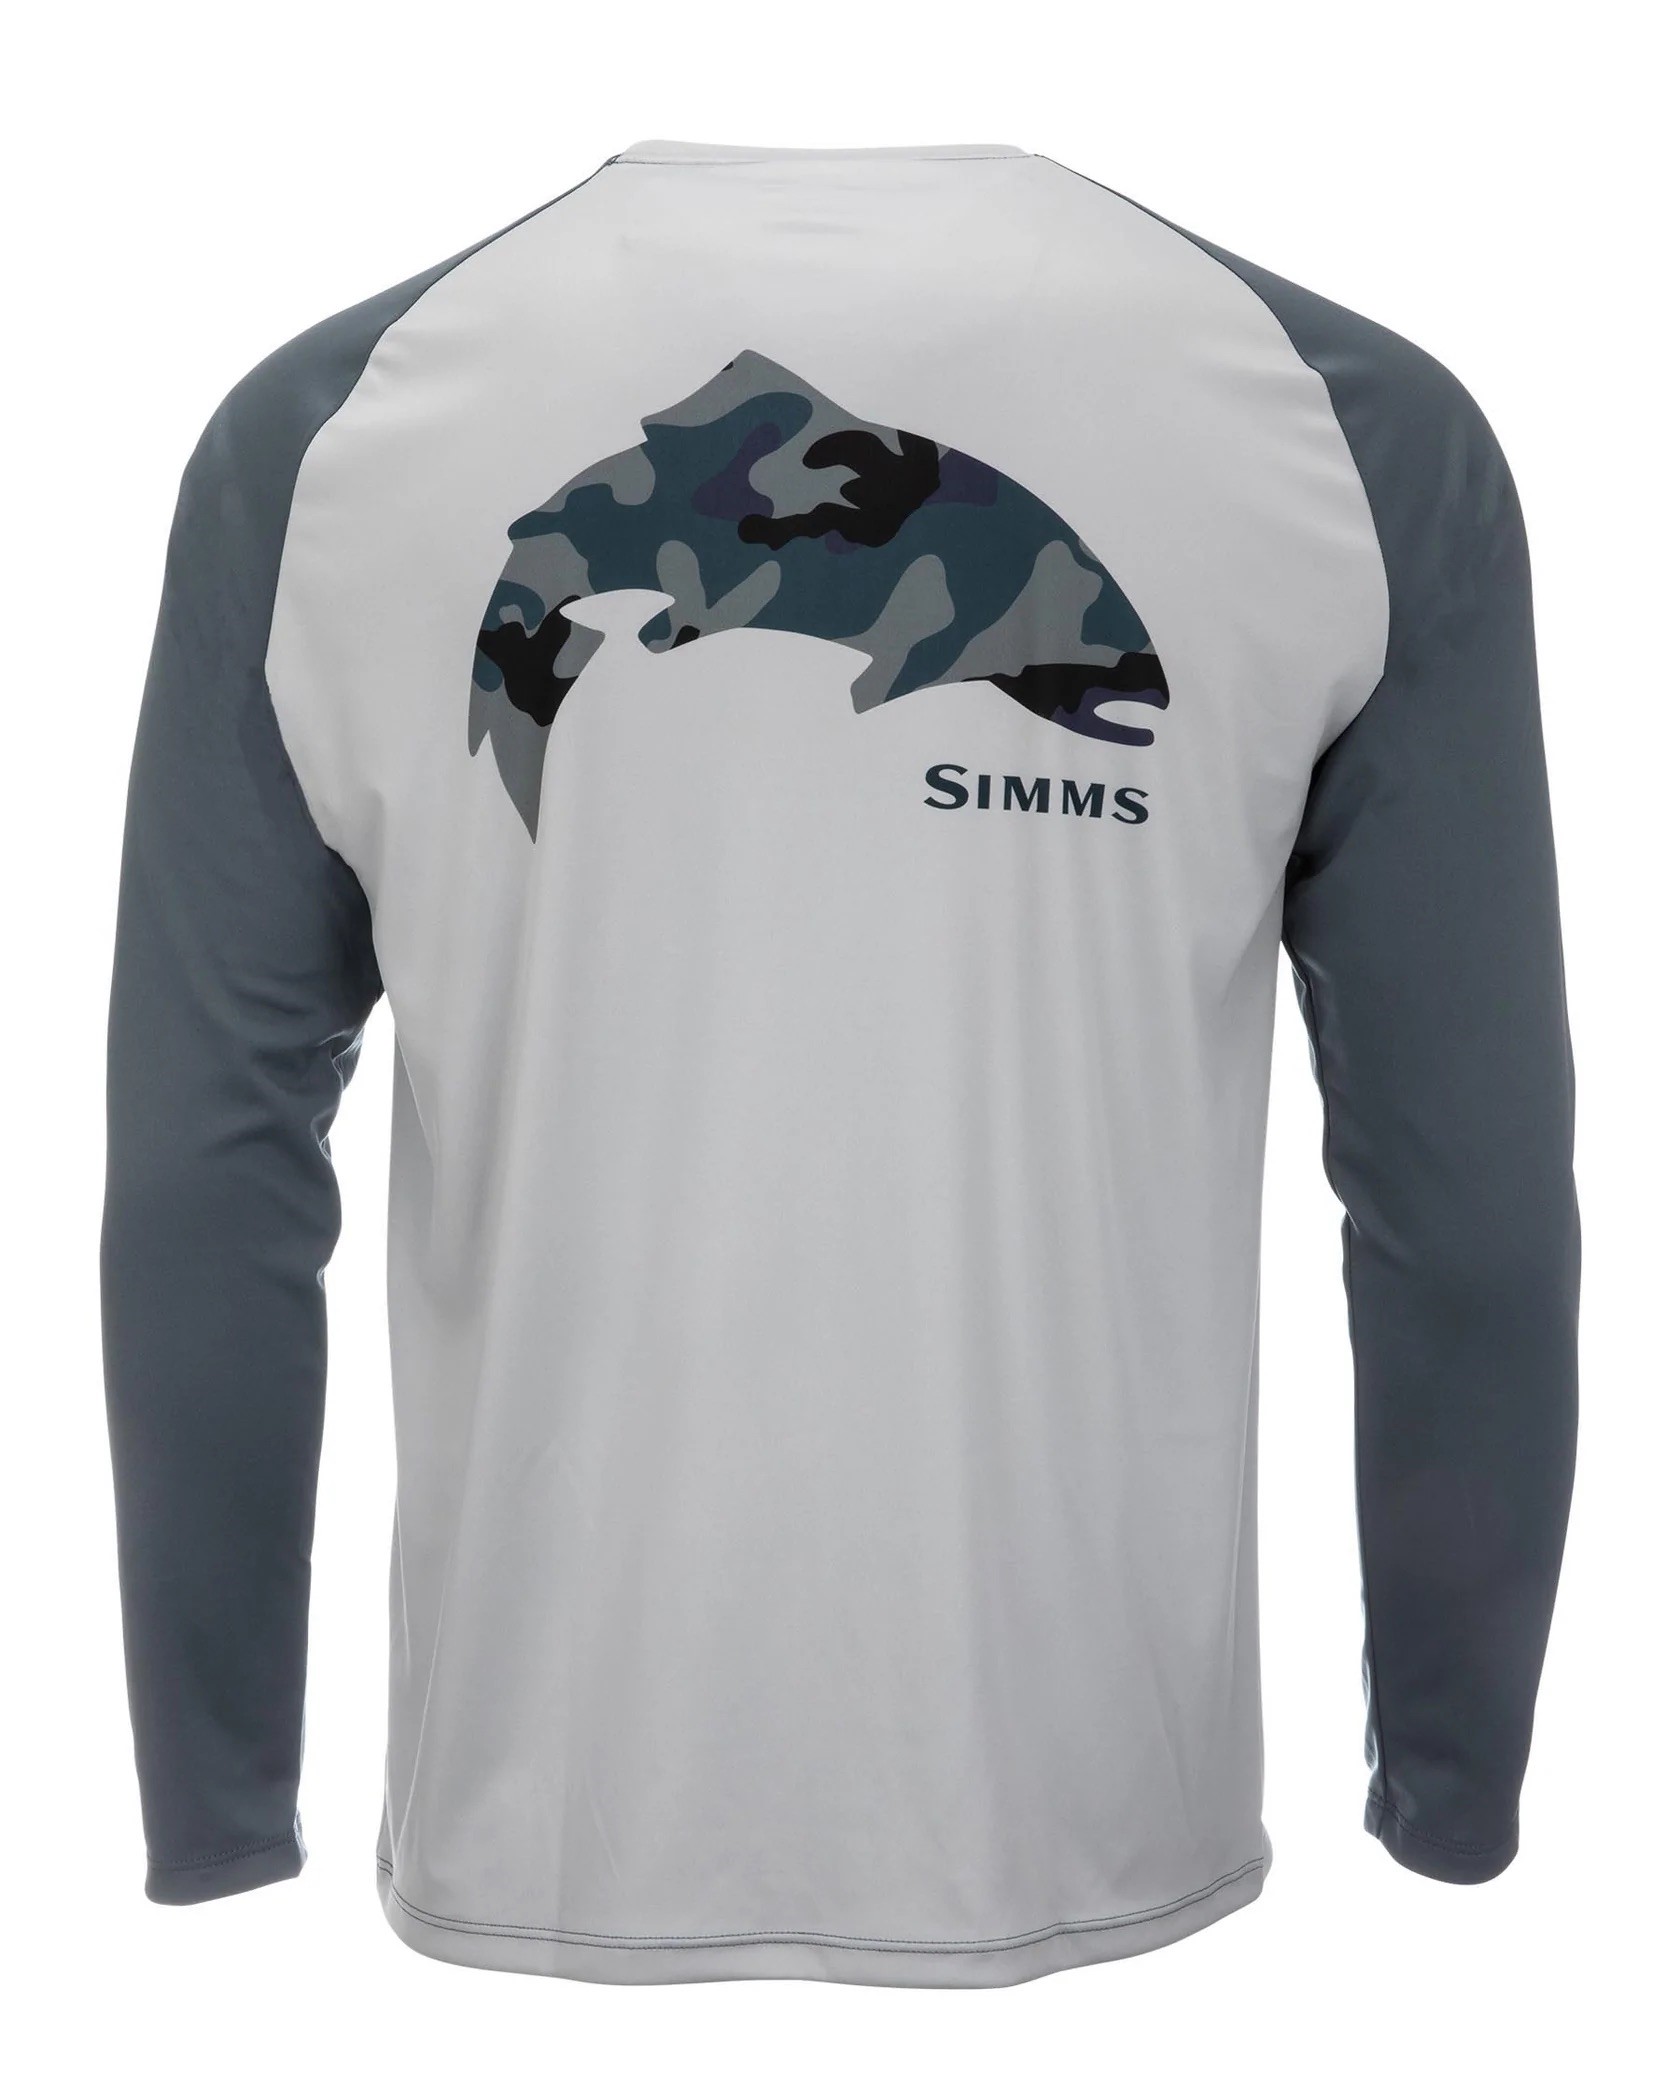 Simms M's Tech Tee - Trout/Sterling/Storm - XL